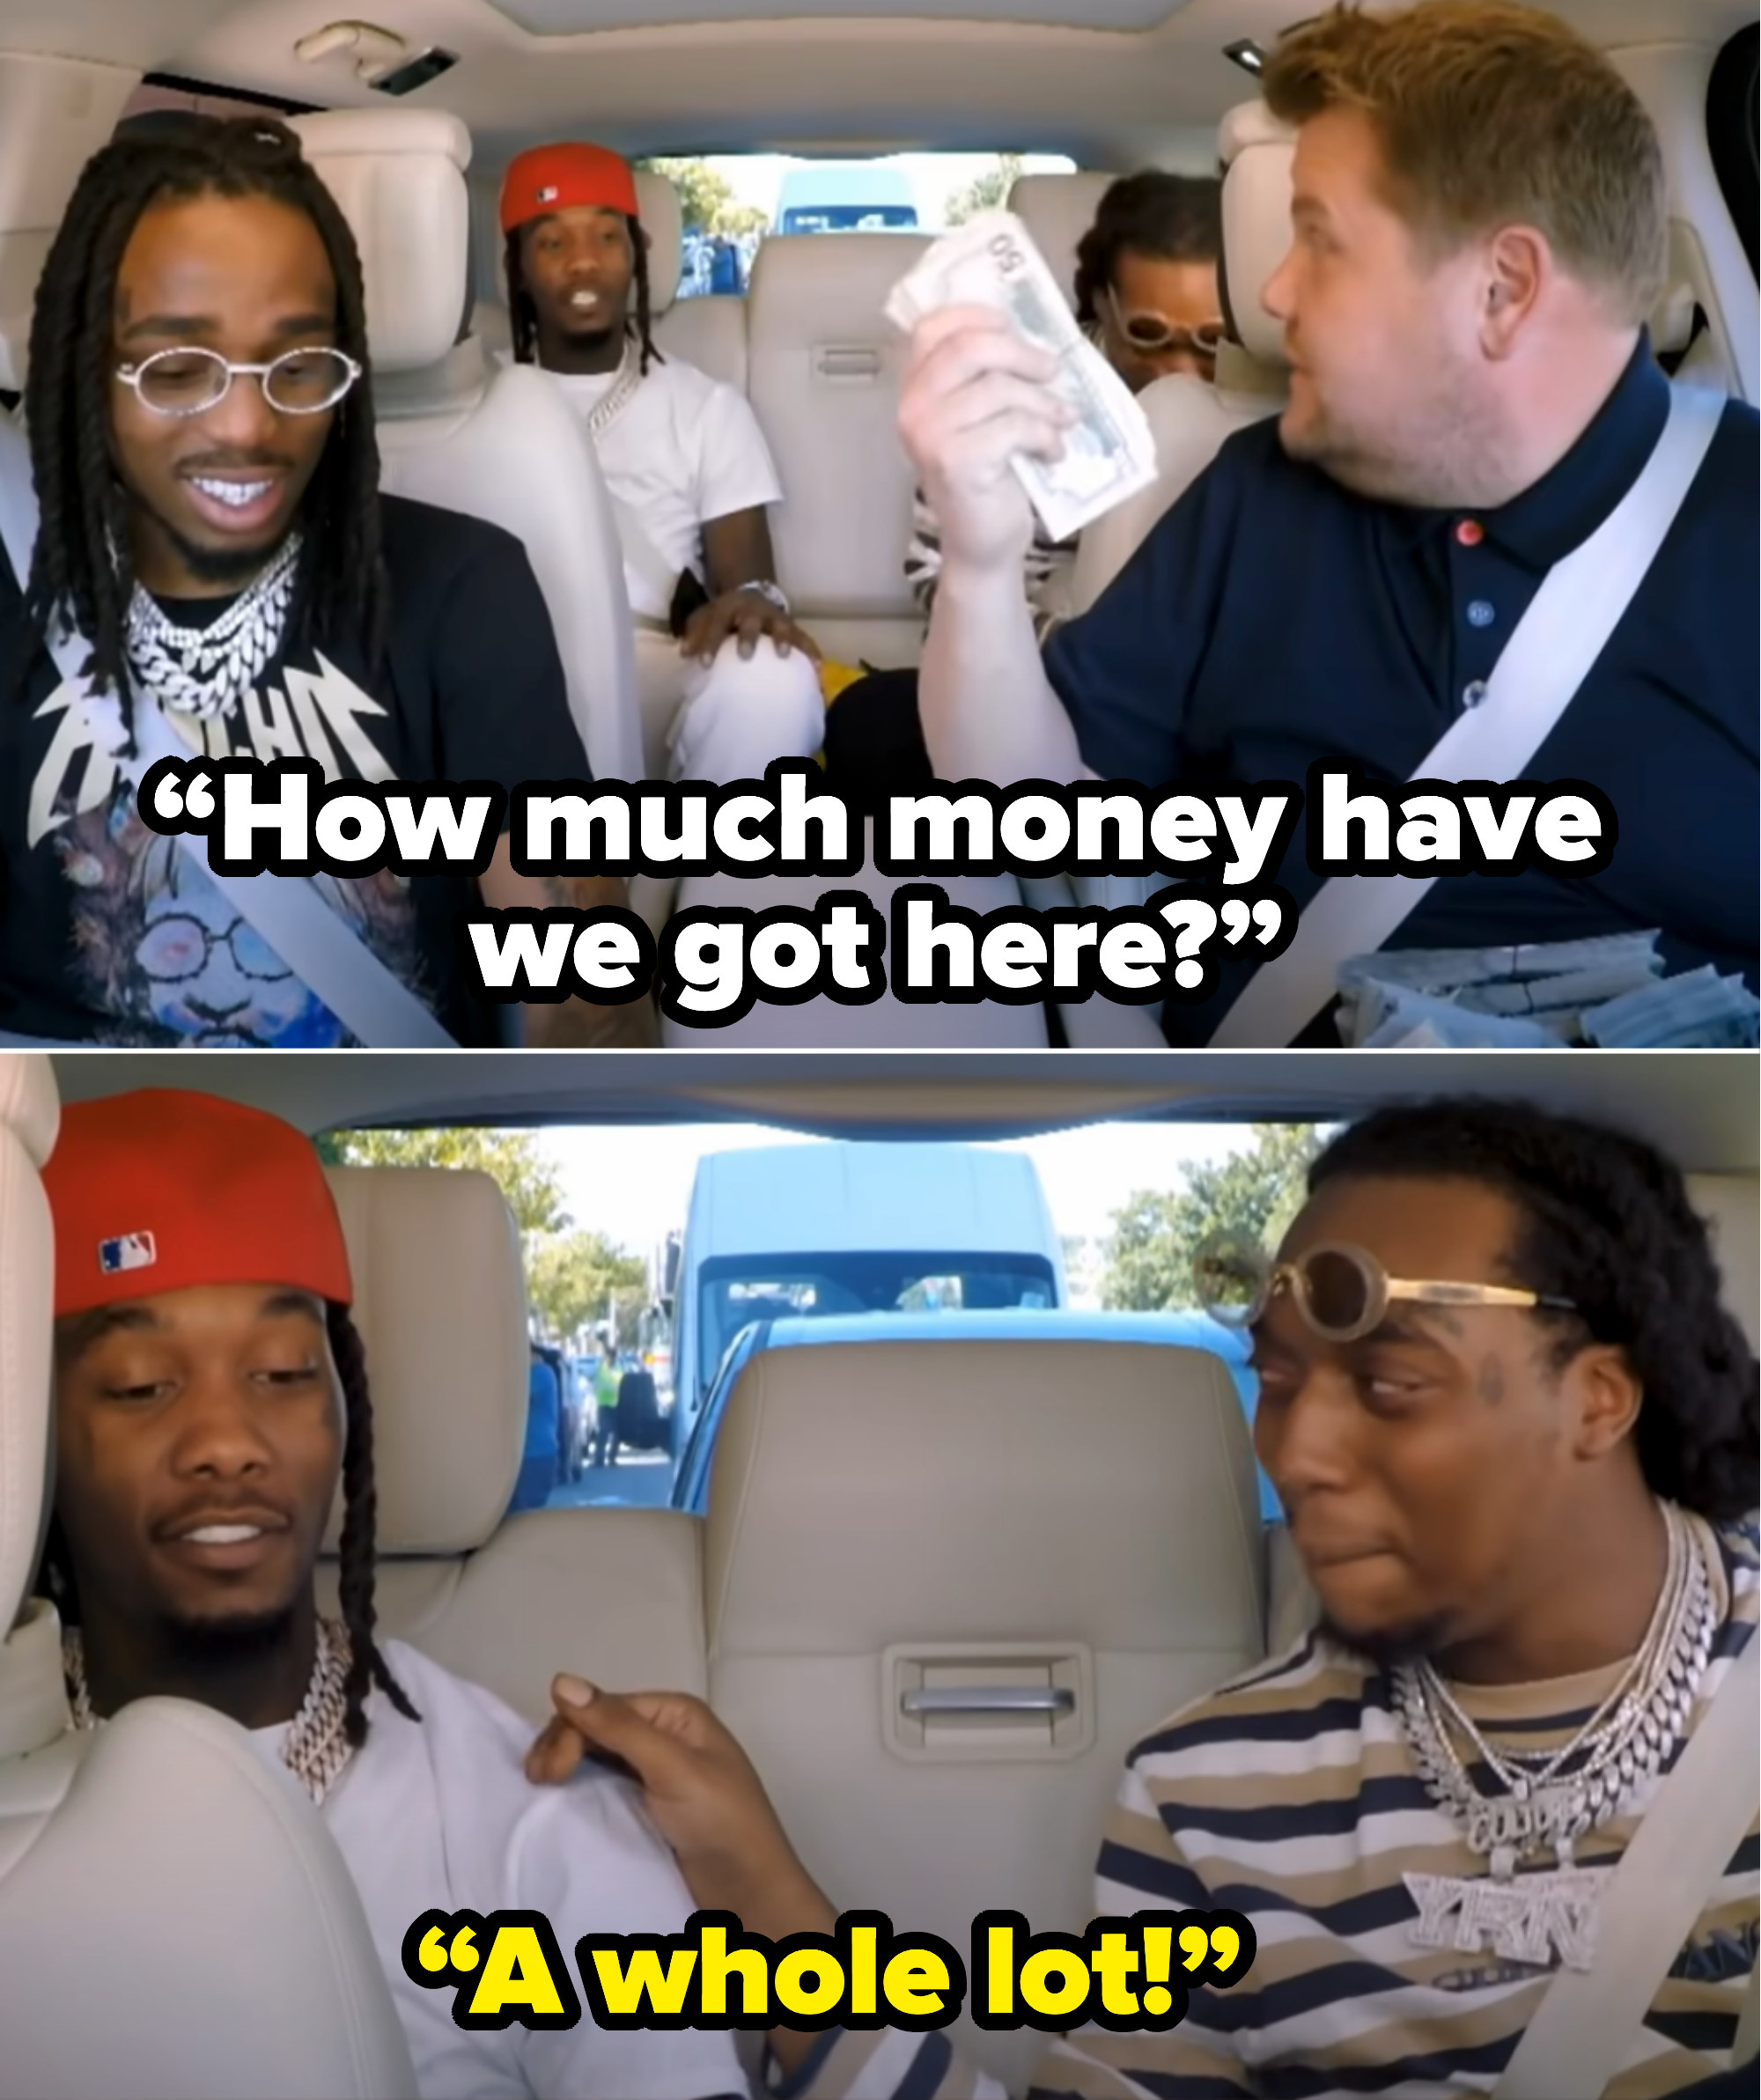 James asks how much money they have in their bag, and Takeoff responds &quot;A whole lot&quot;